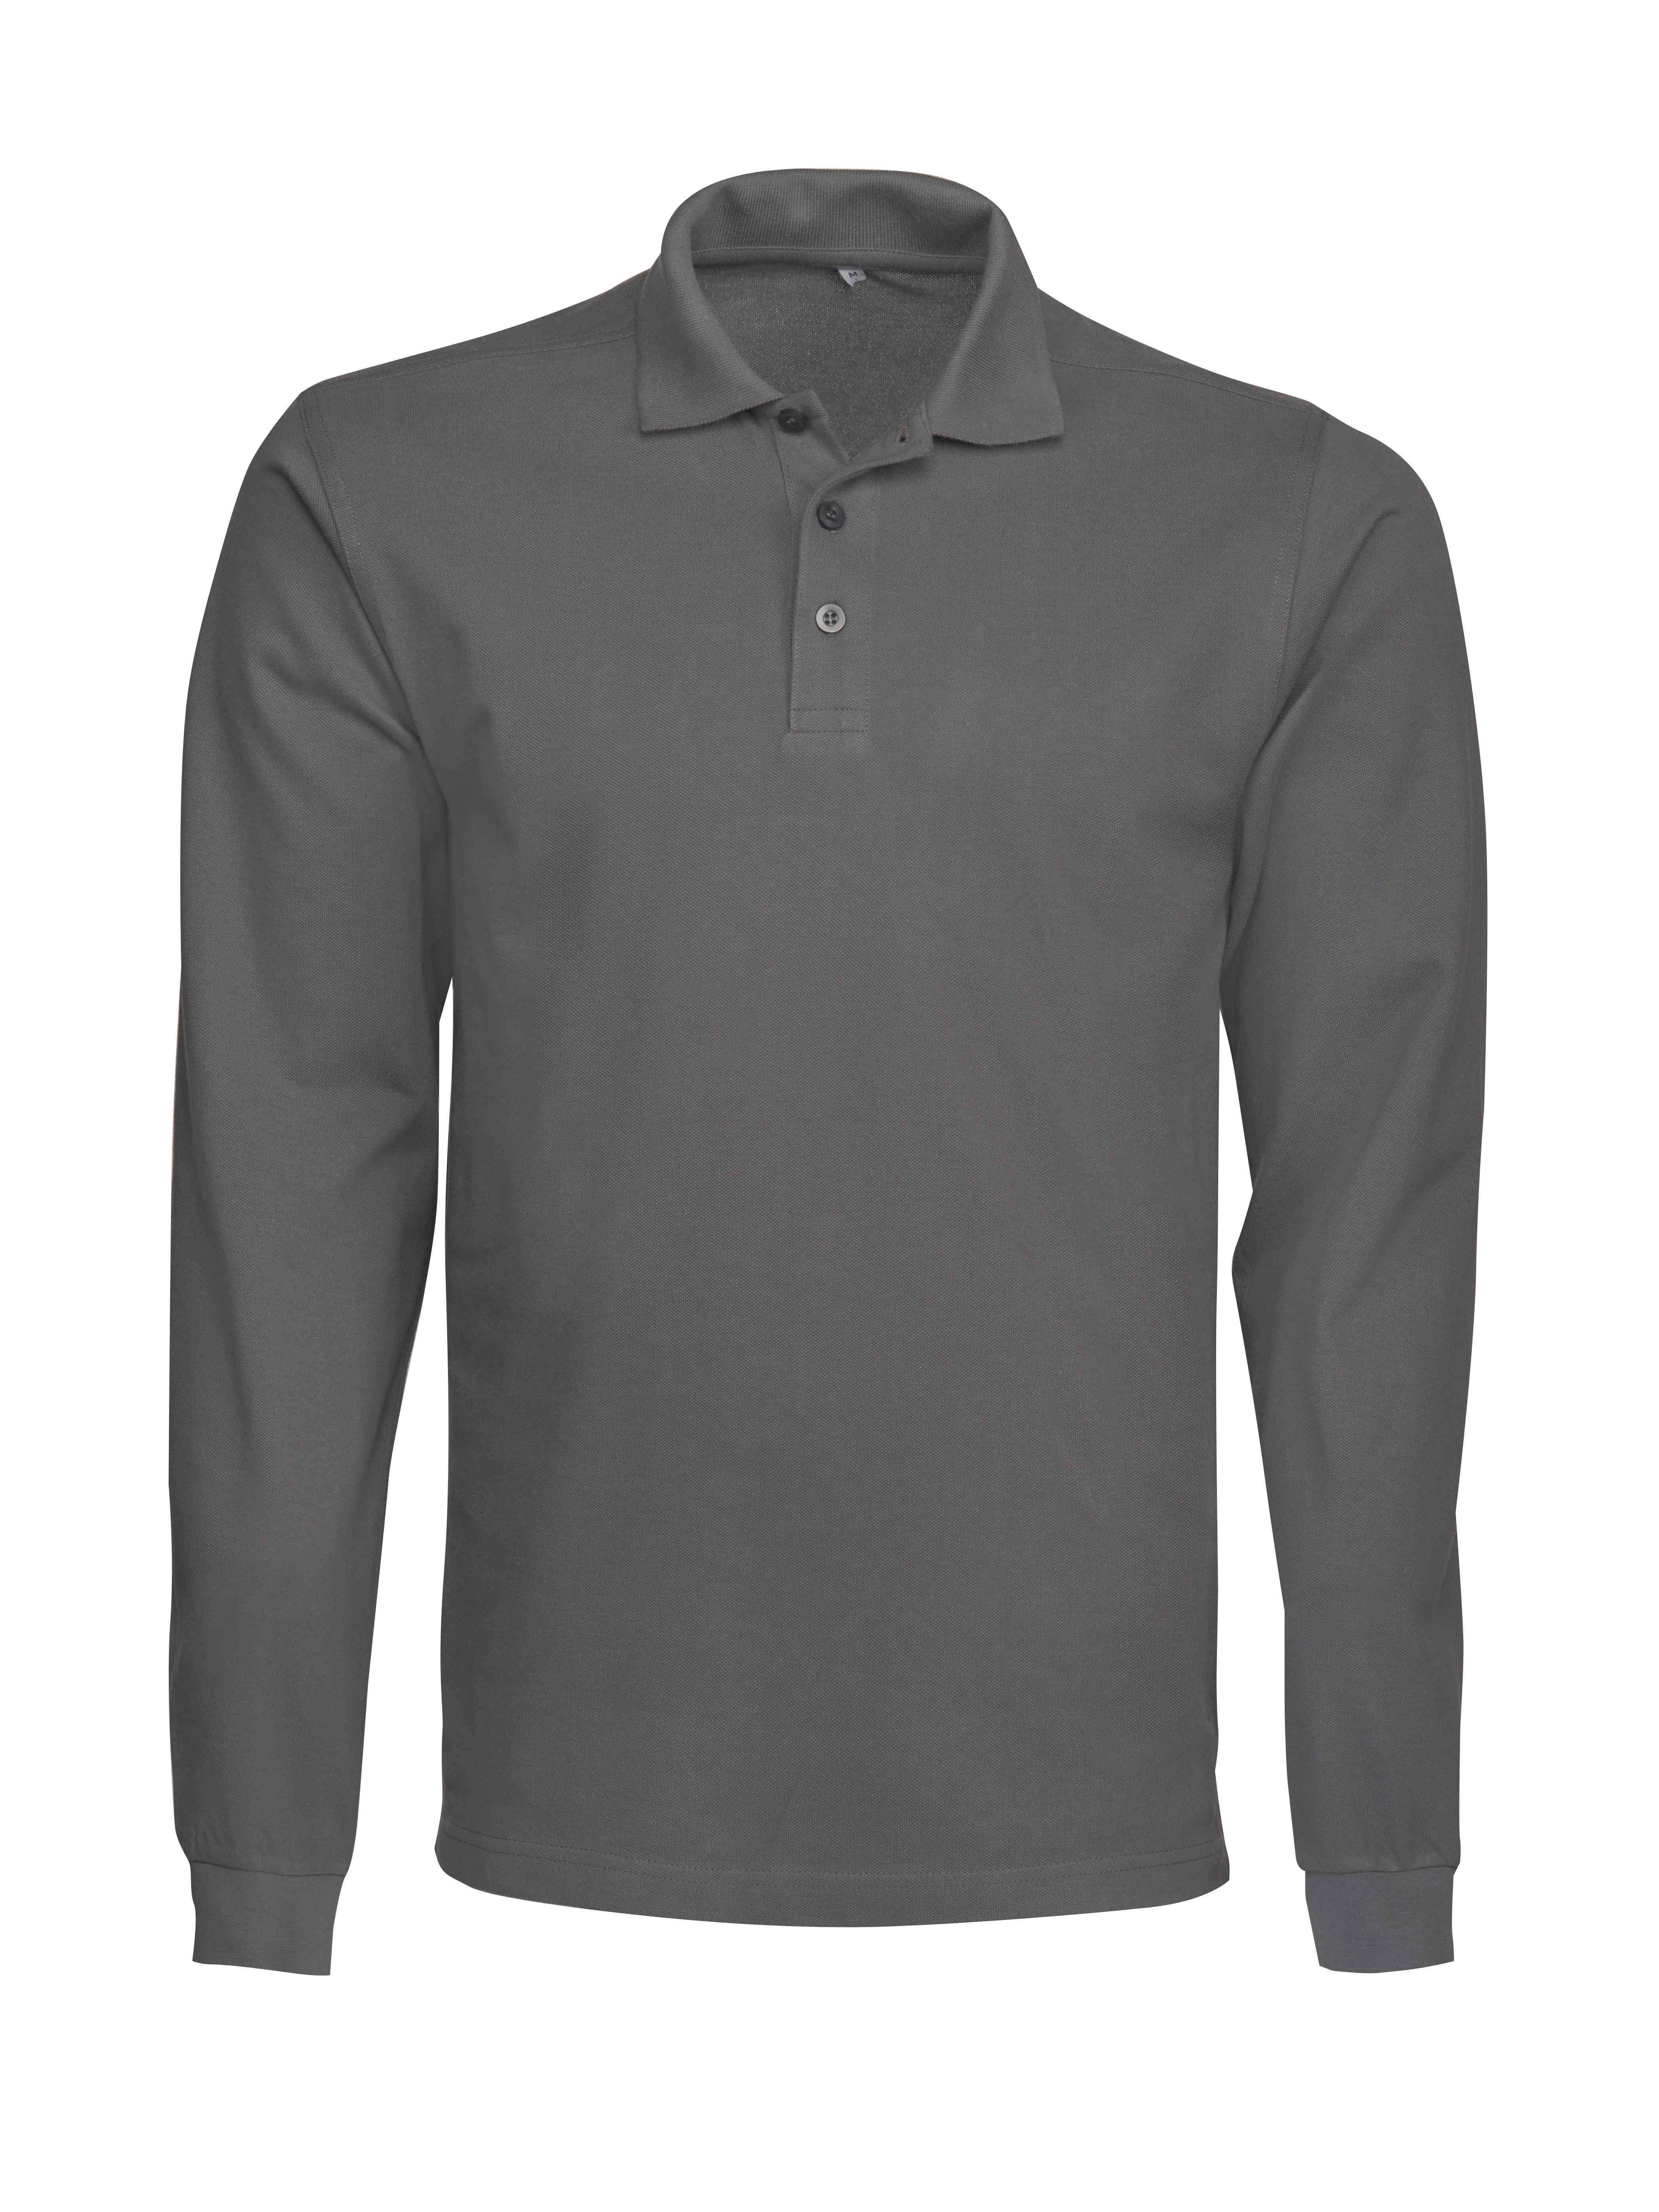 SURF POLO RSX L/S STEEL GREY PE-2265011-935-6